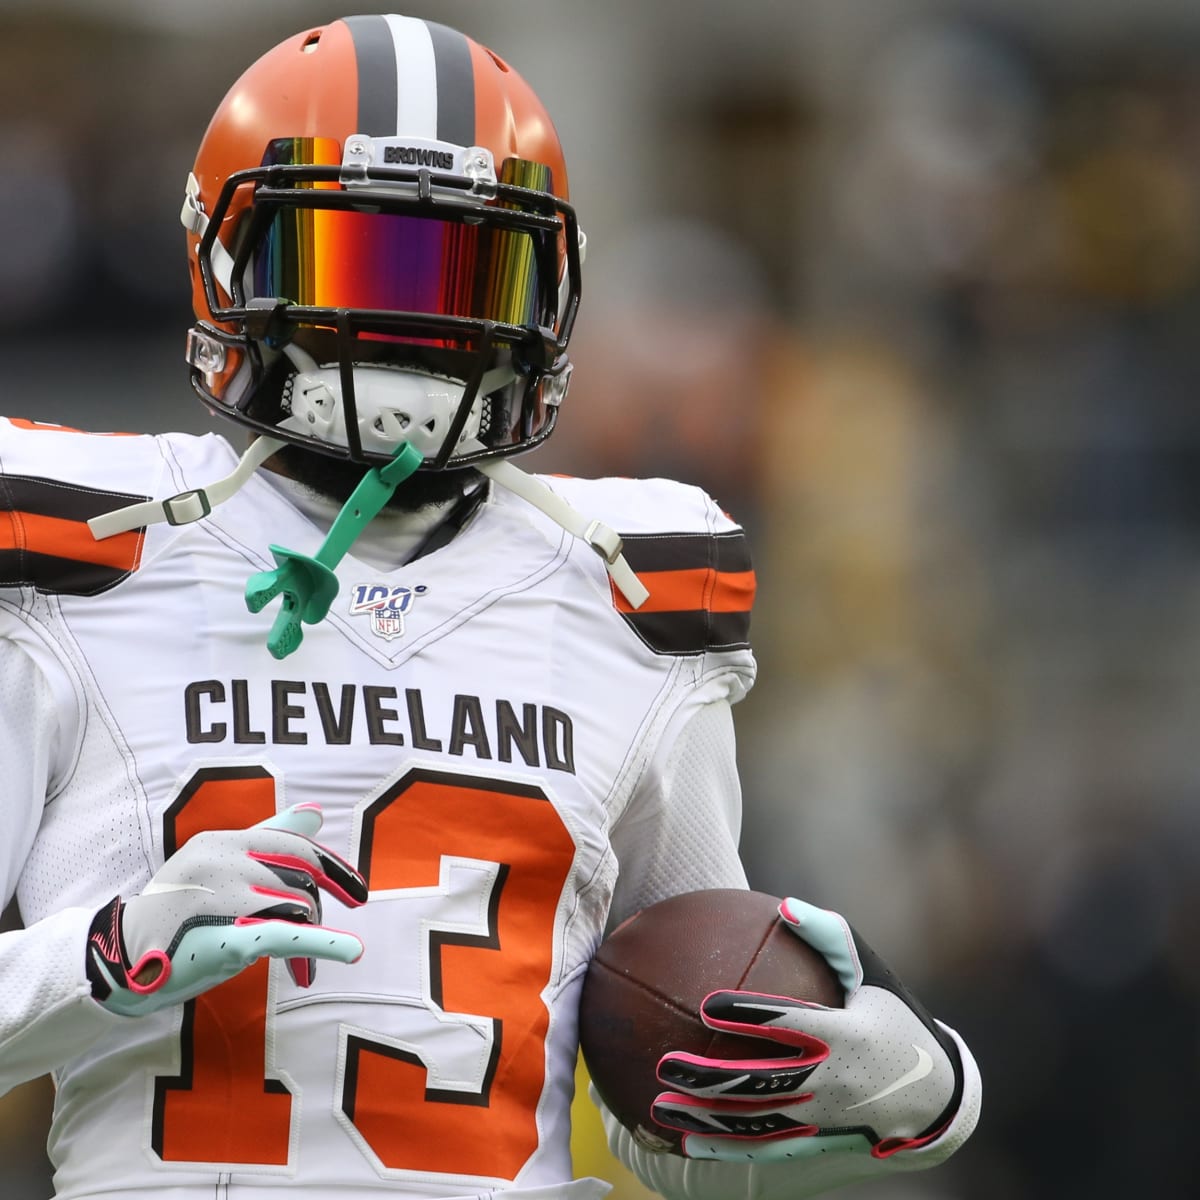 Odell Beckham Jr. is heading to the Browns